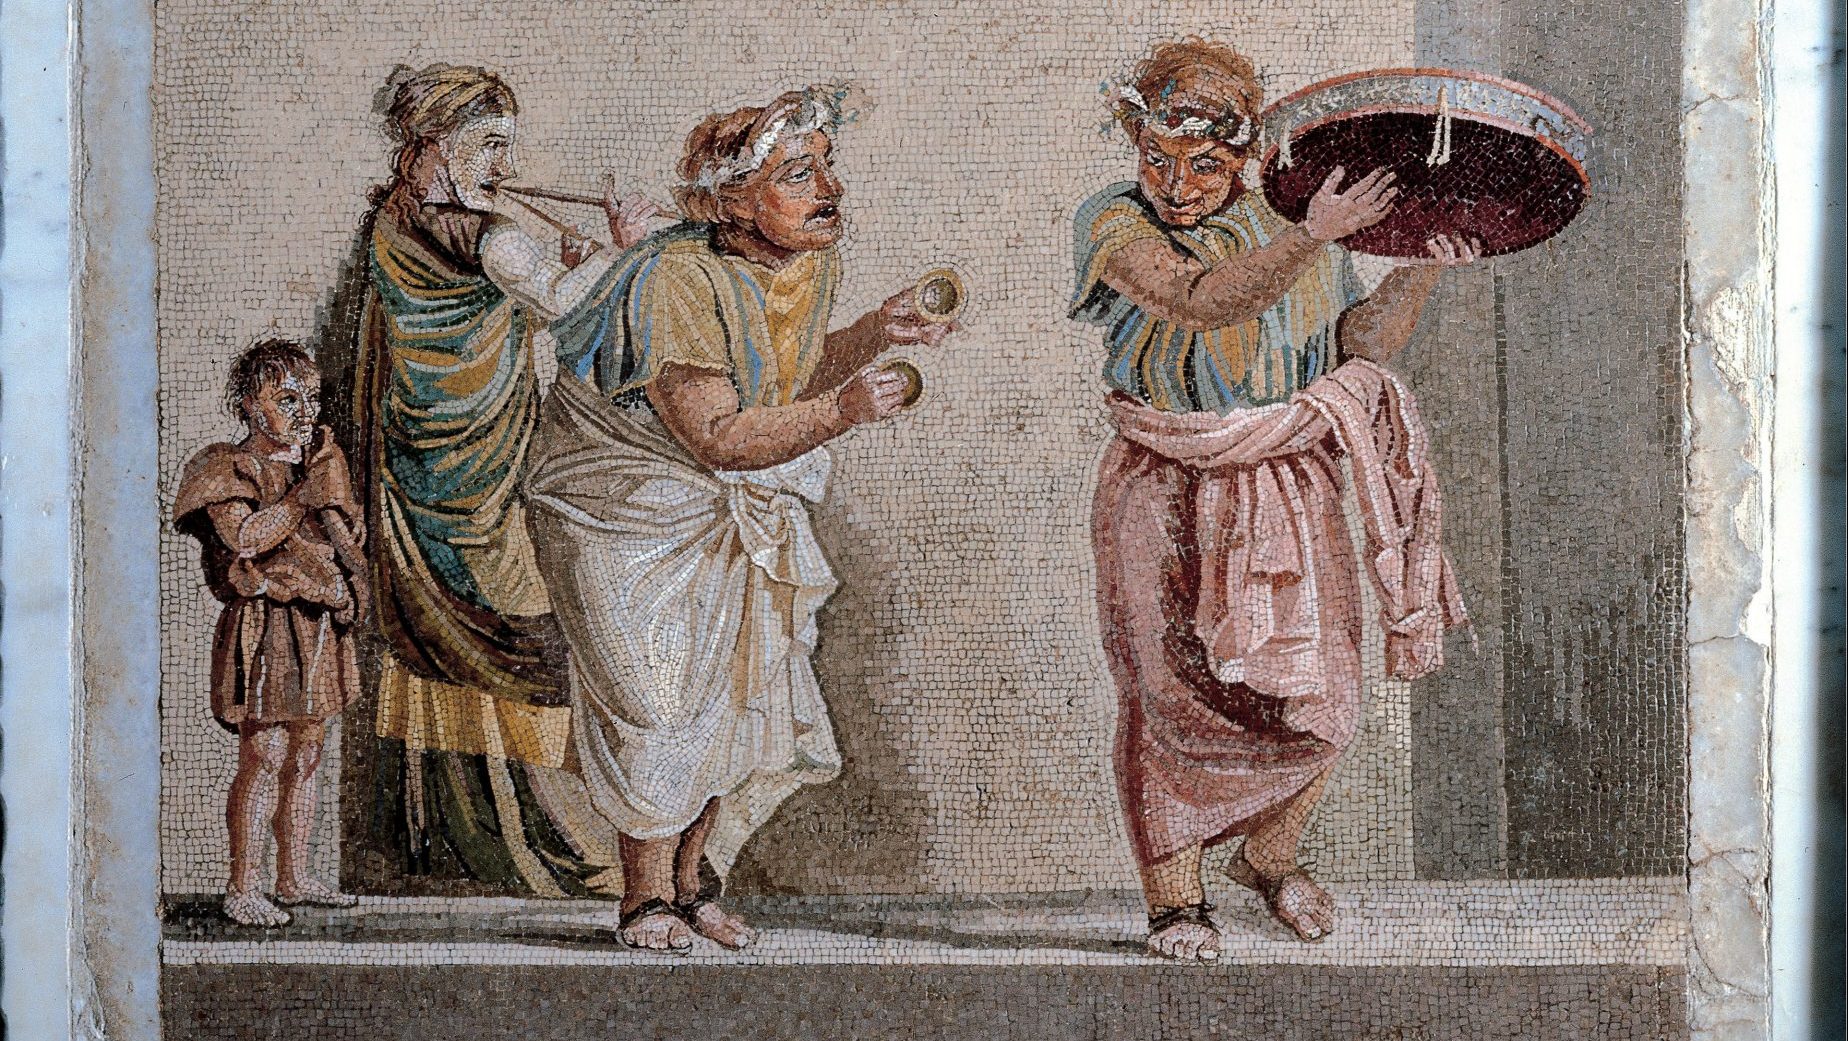 Street musicians from Ancient Rome depicted in a floor mosaic at the Naples National Archaeological Museum. Photo: Mondadori Portfolio/
Getty Images.